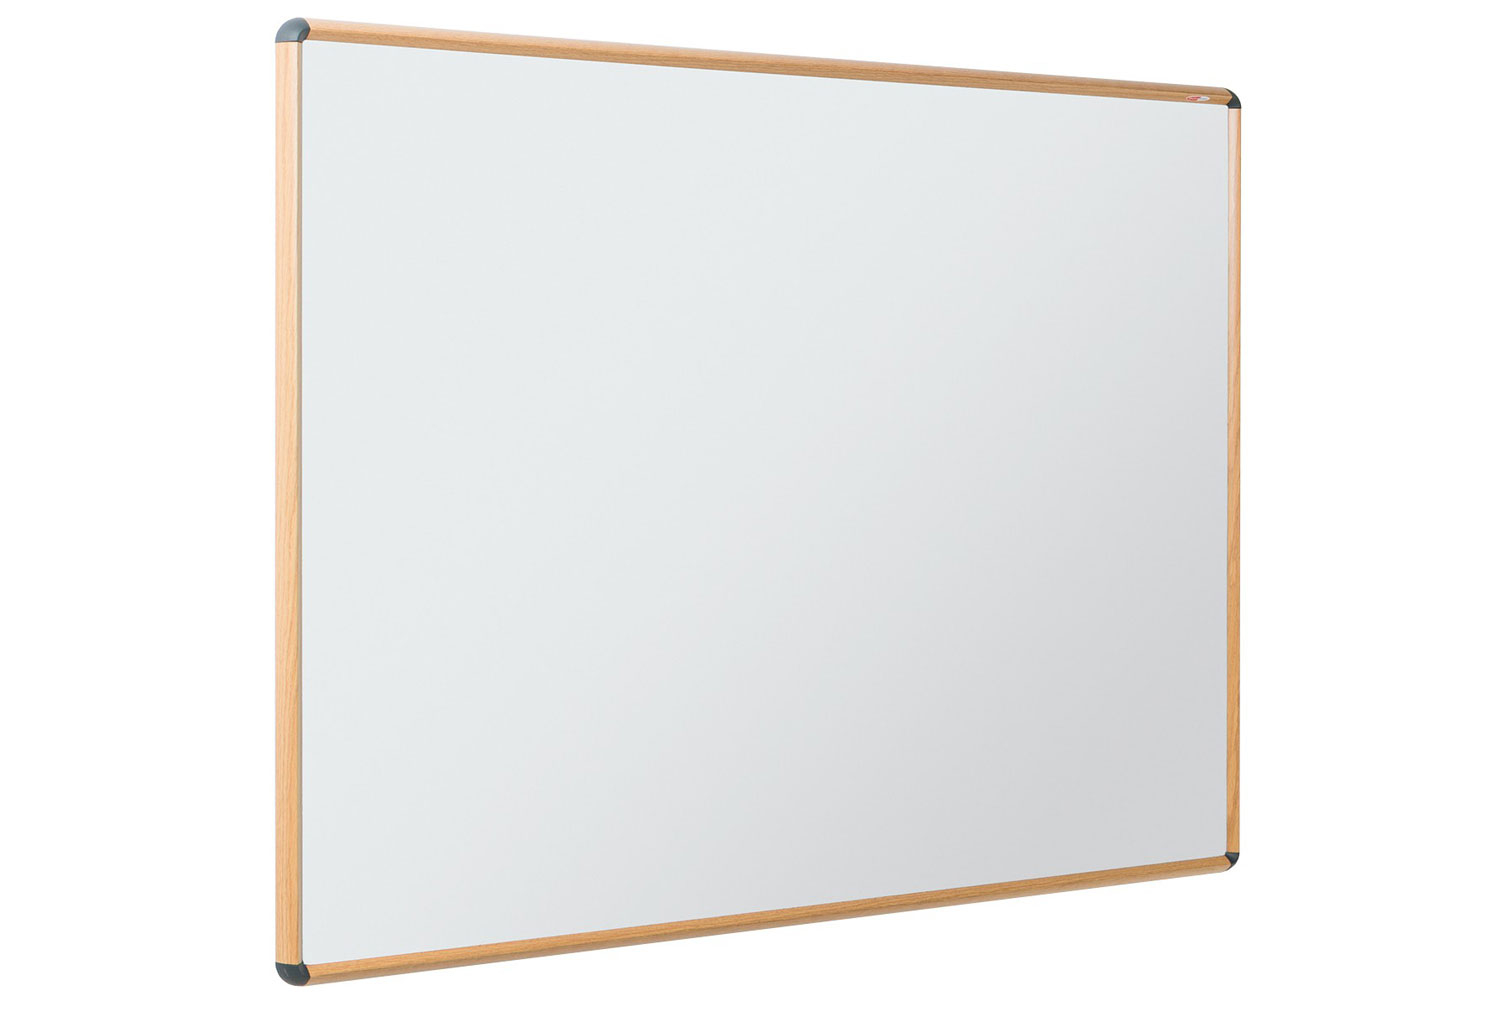 Shield Design Wood Effect Whiteboards, 60wx90h (cm)